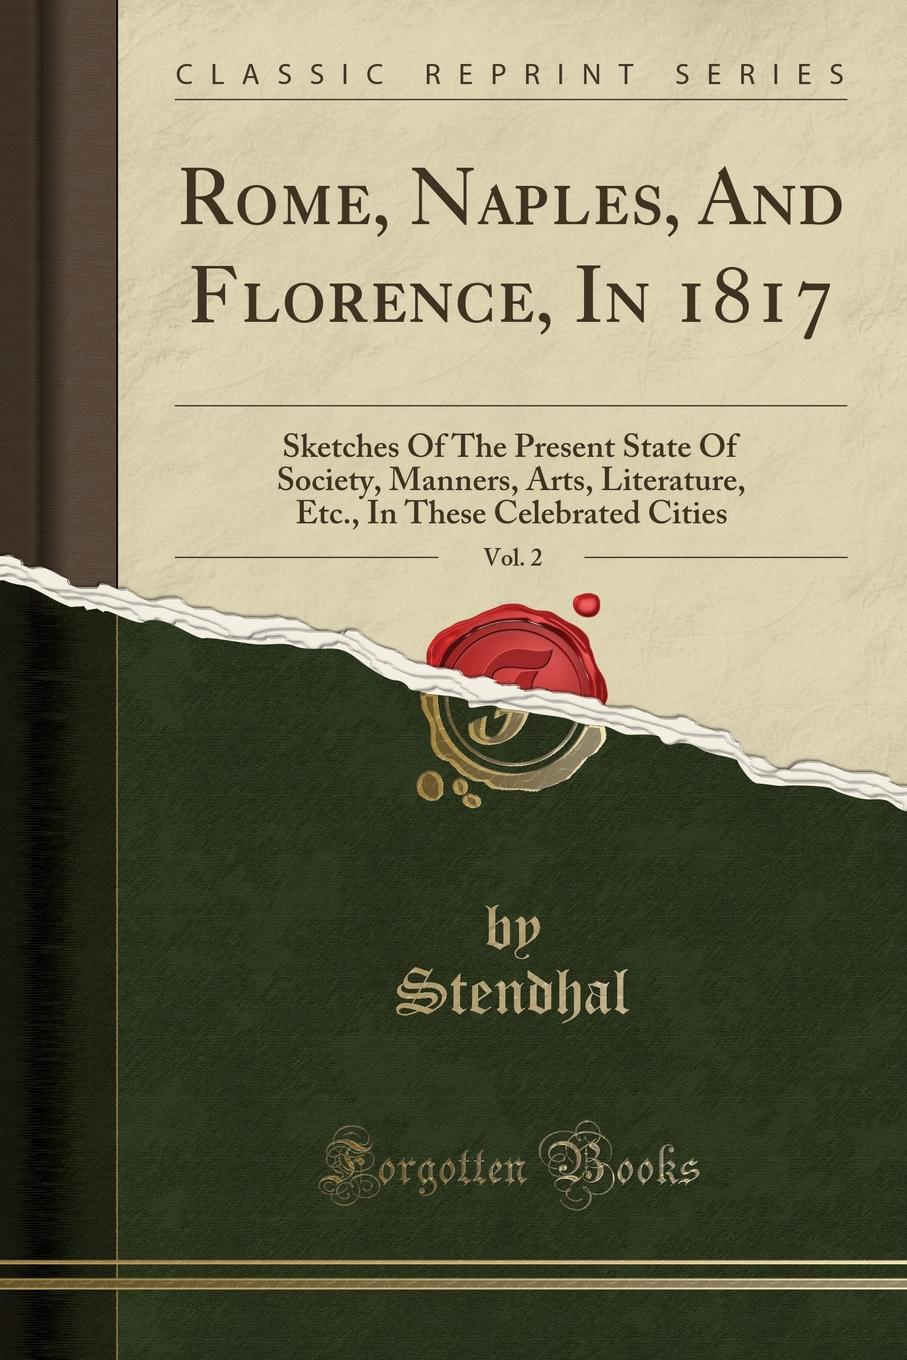 Rome, Naples, And Florence, In 1817, Vol. 2. Sketches Of The Present State Of Society, Manners, Arts, Literature, Etc., In These Celebrated Cities (Classic Reprint)